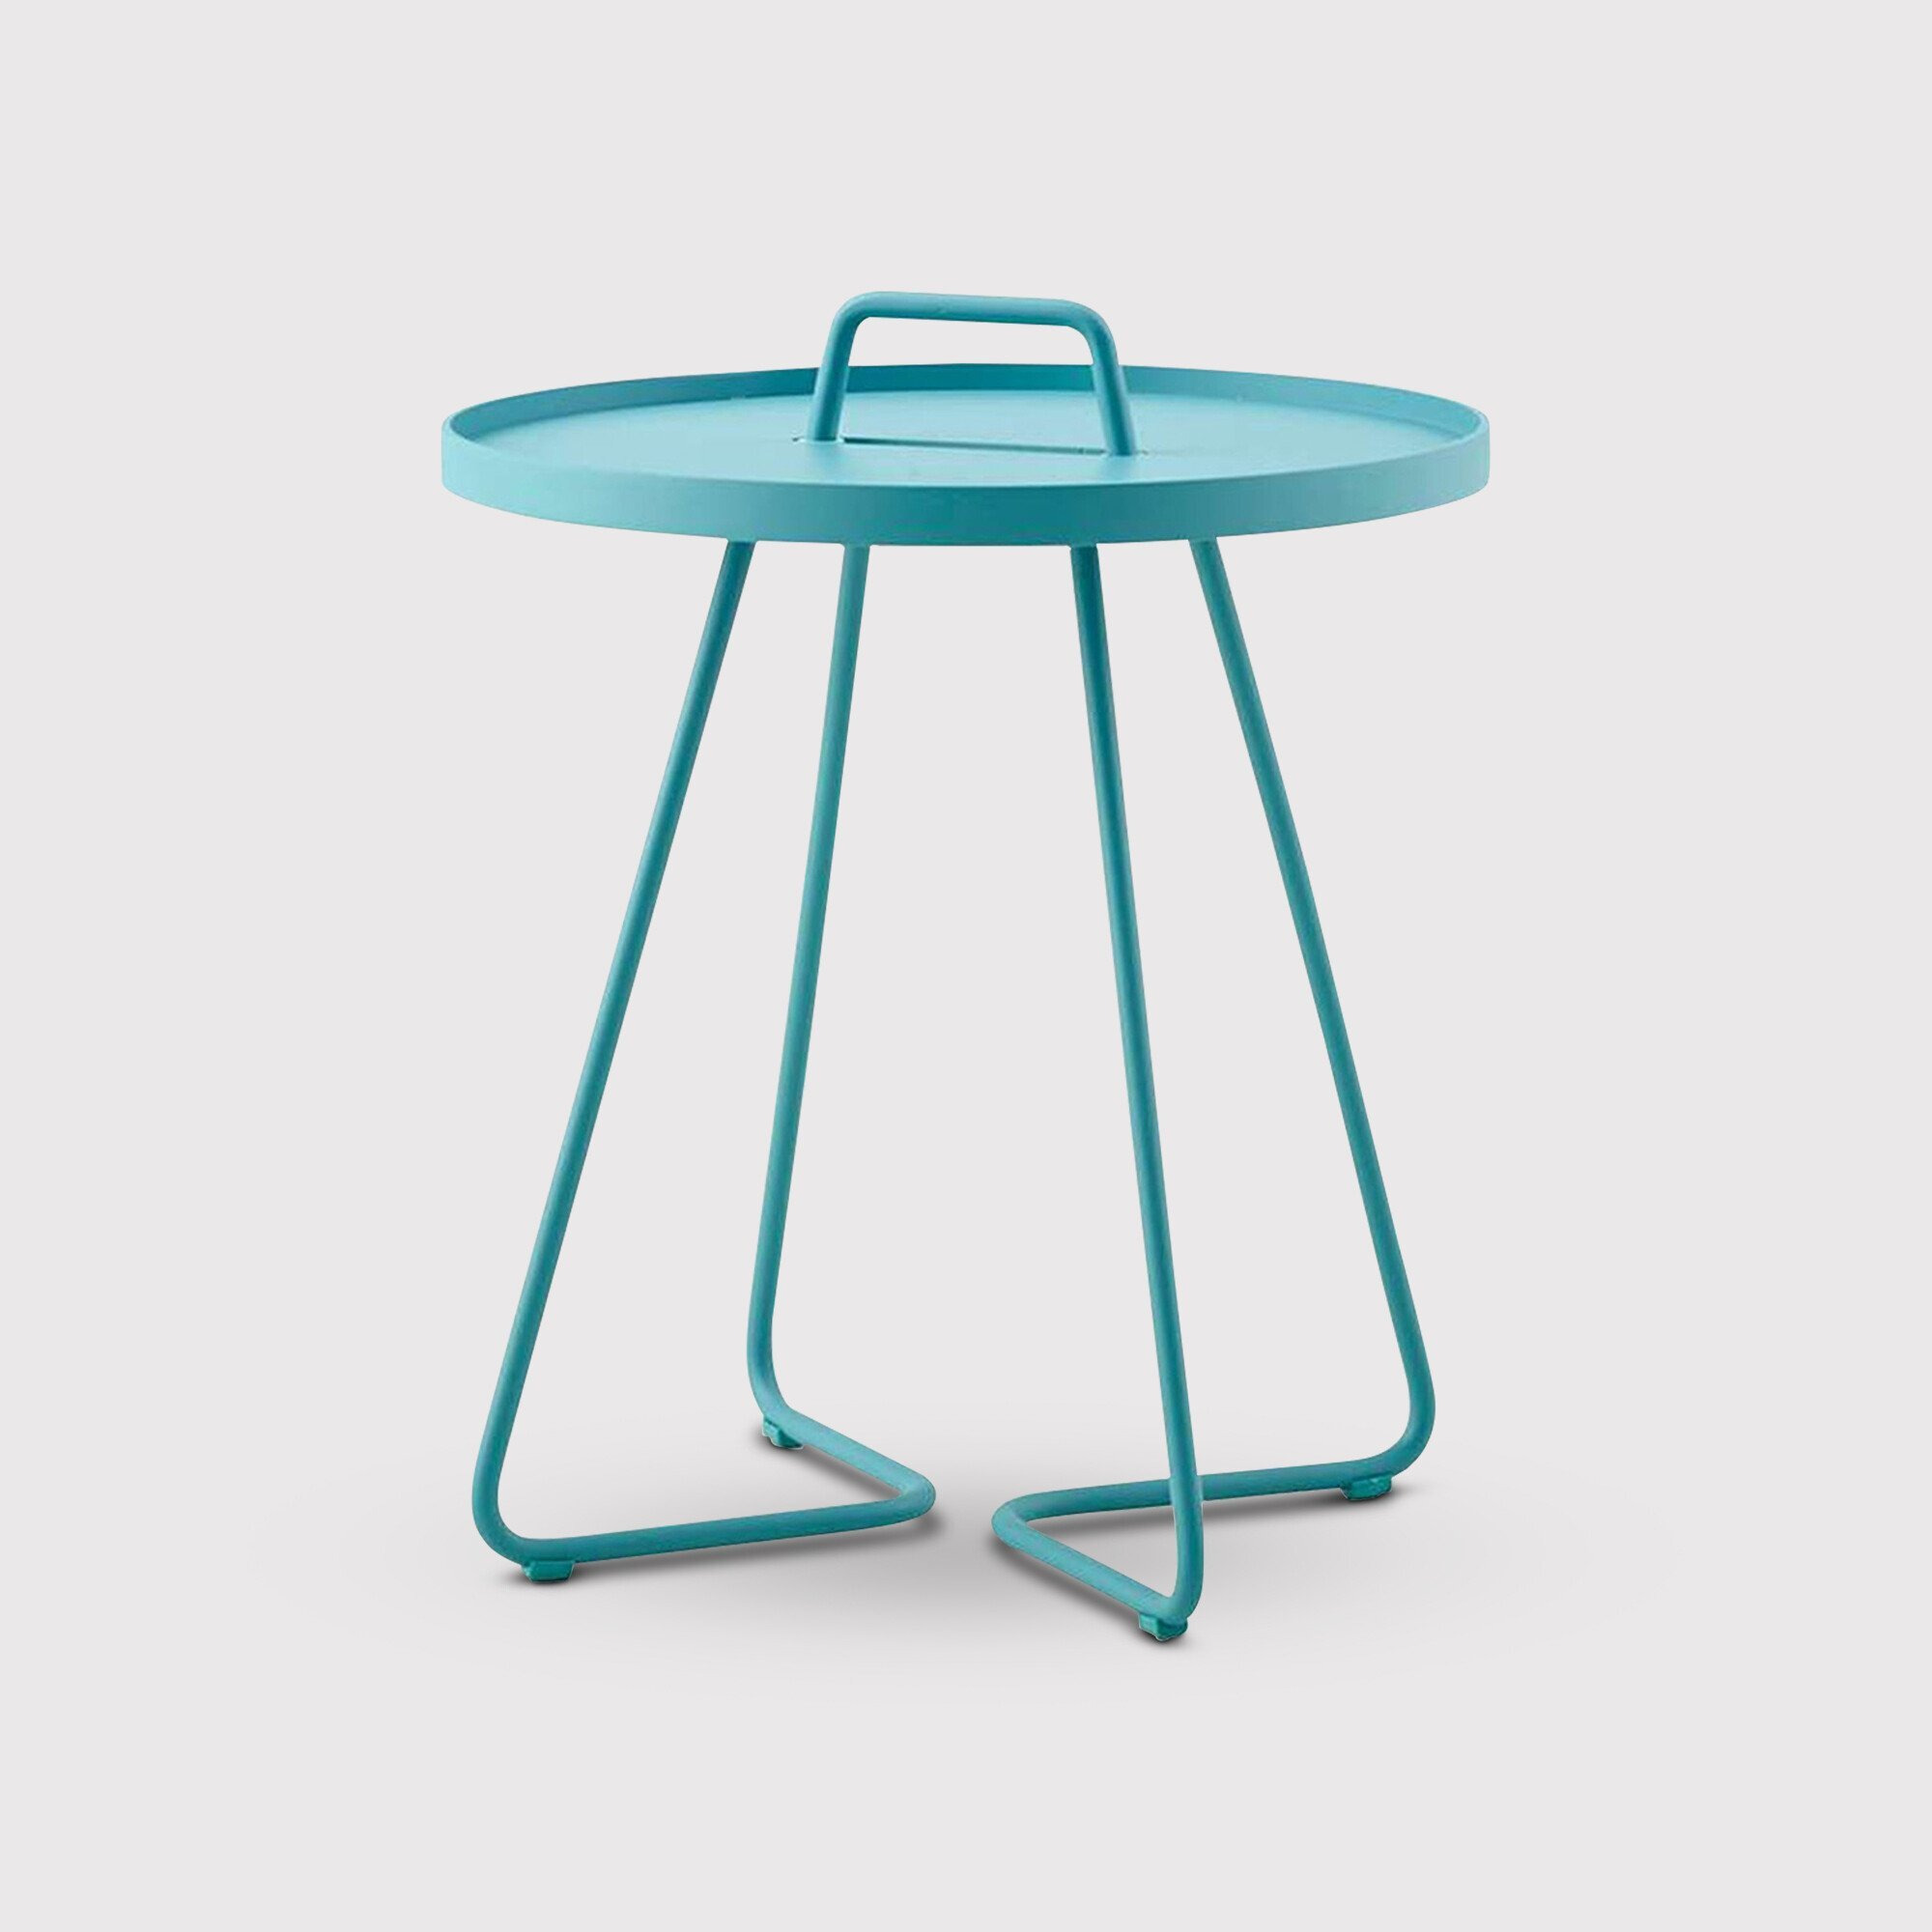 Cane Line On The Move Small Side Table, Round, Blue Metal - Barker & Stonehouse - image 1